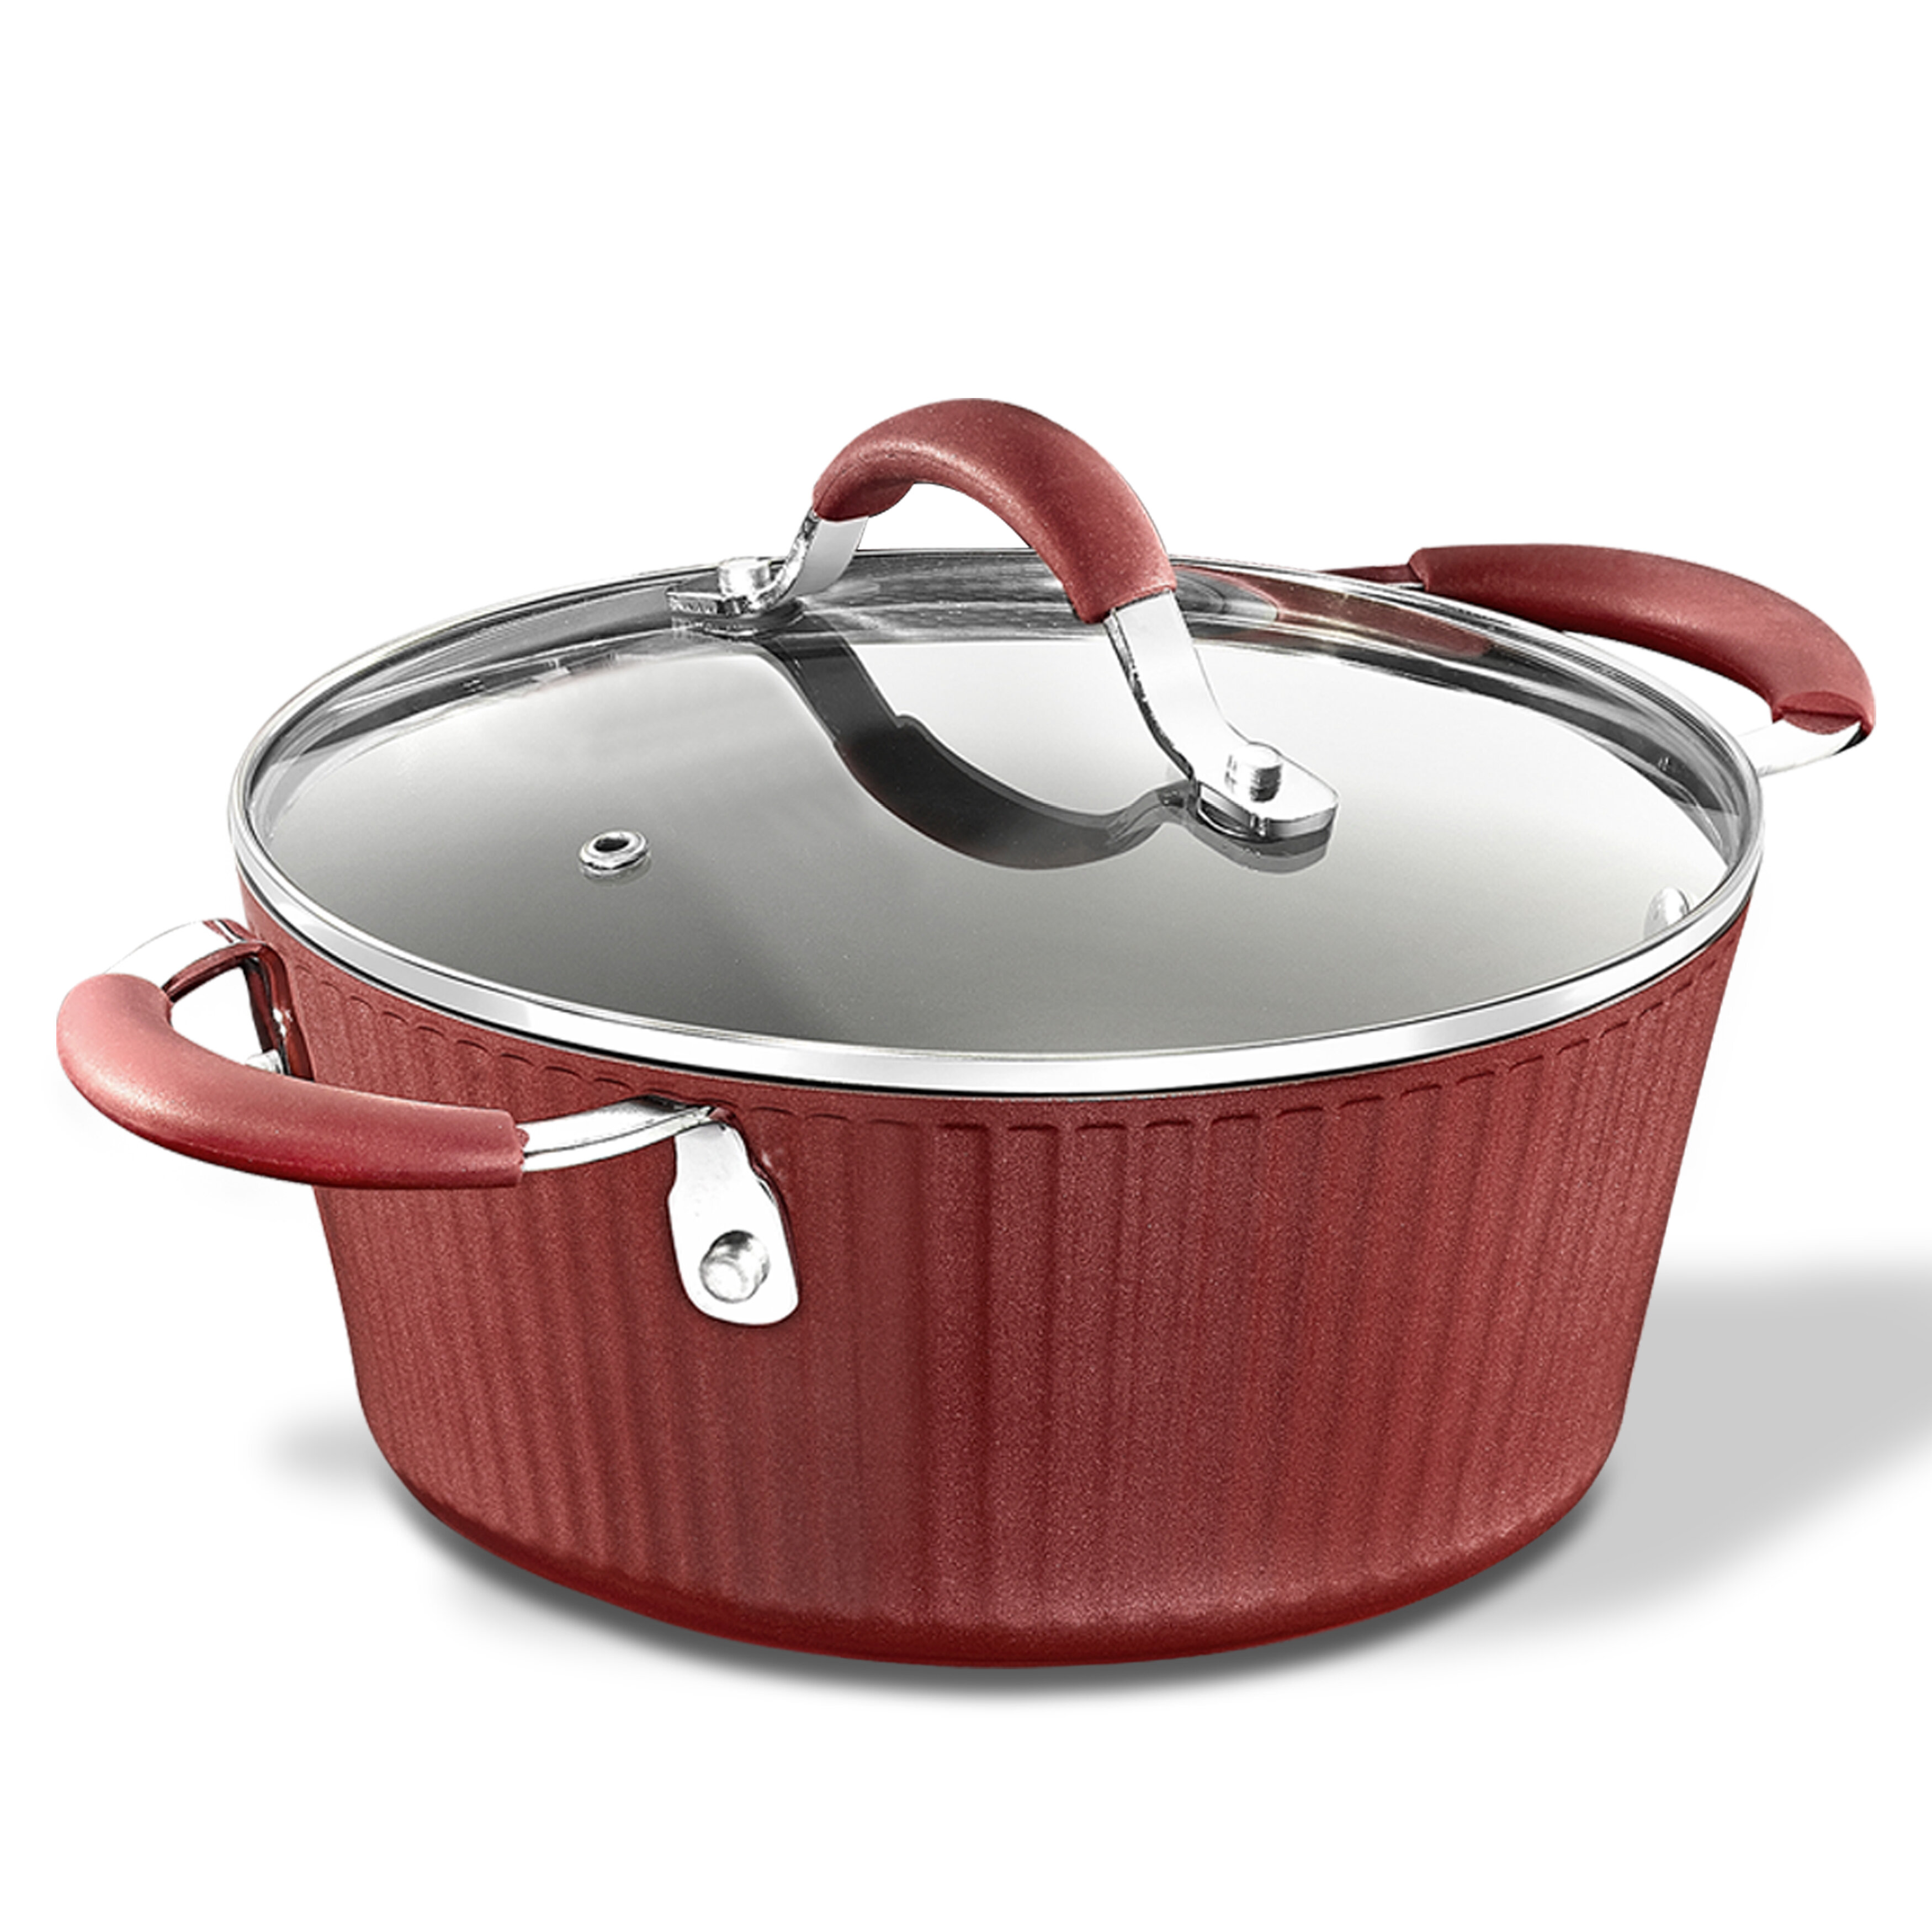 NutriChef Dutch Oven Pot with Lid - Non-Stick High-Qualified Kitchen  Cookware with See-Through Tempered Glass Lids, 5 Quart